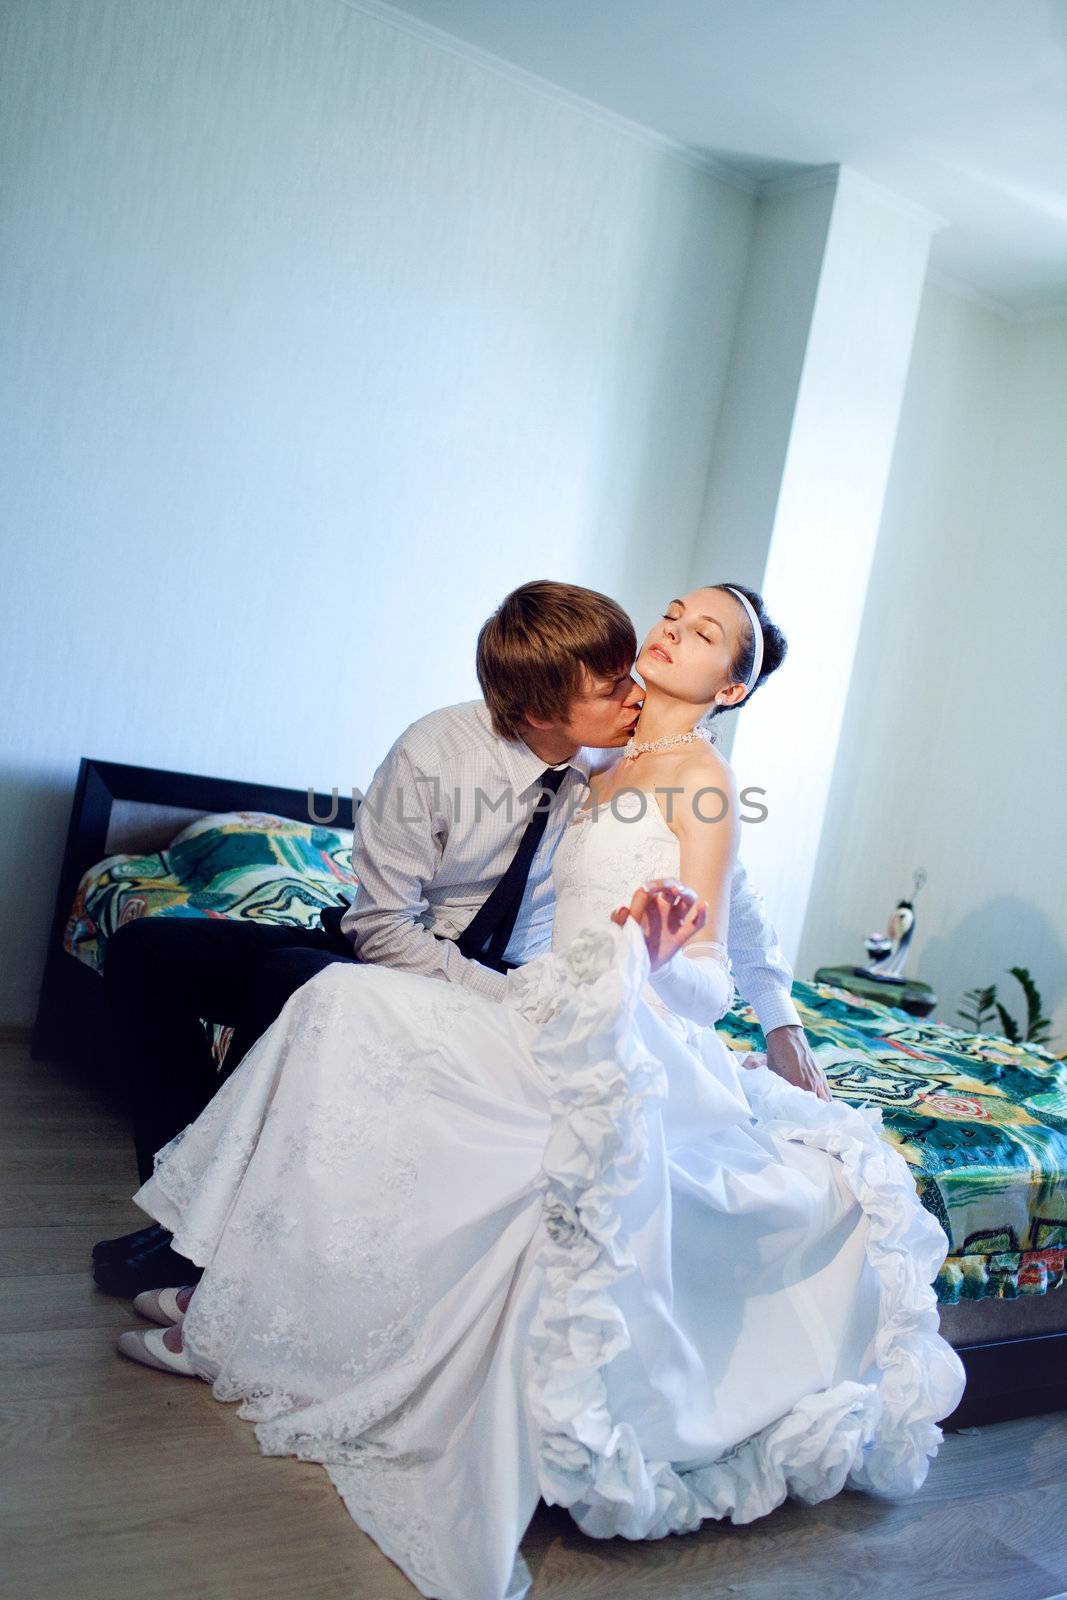 kiss on the bed by vsurkov